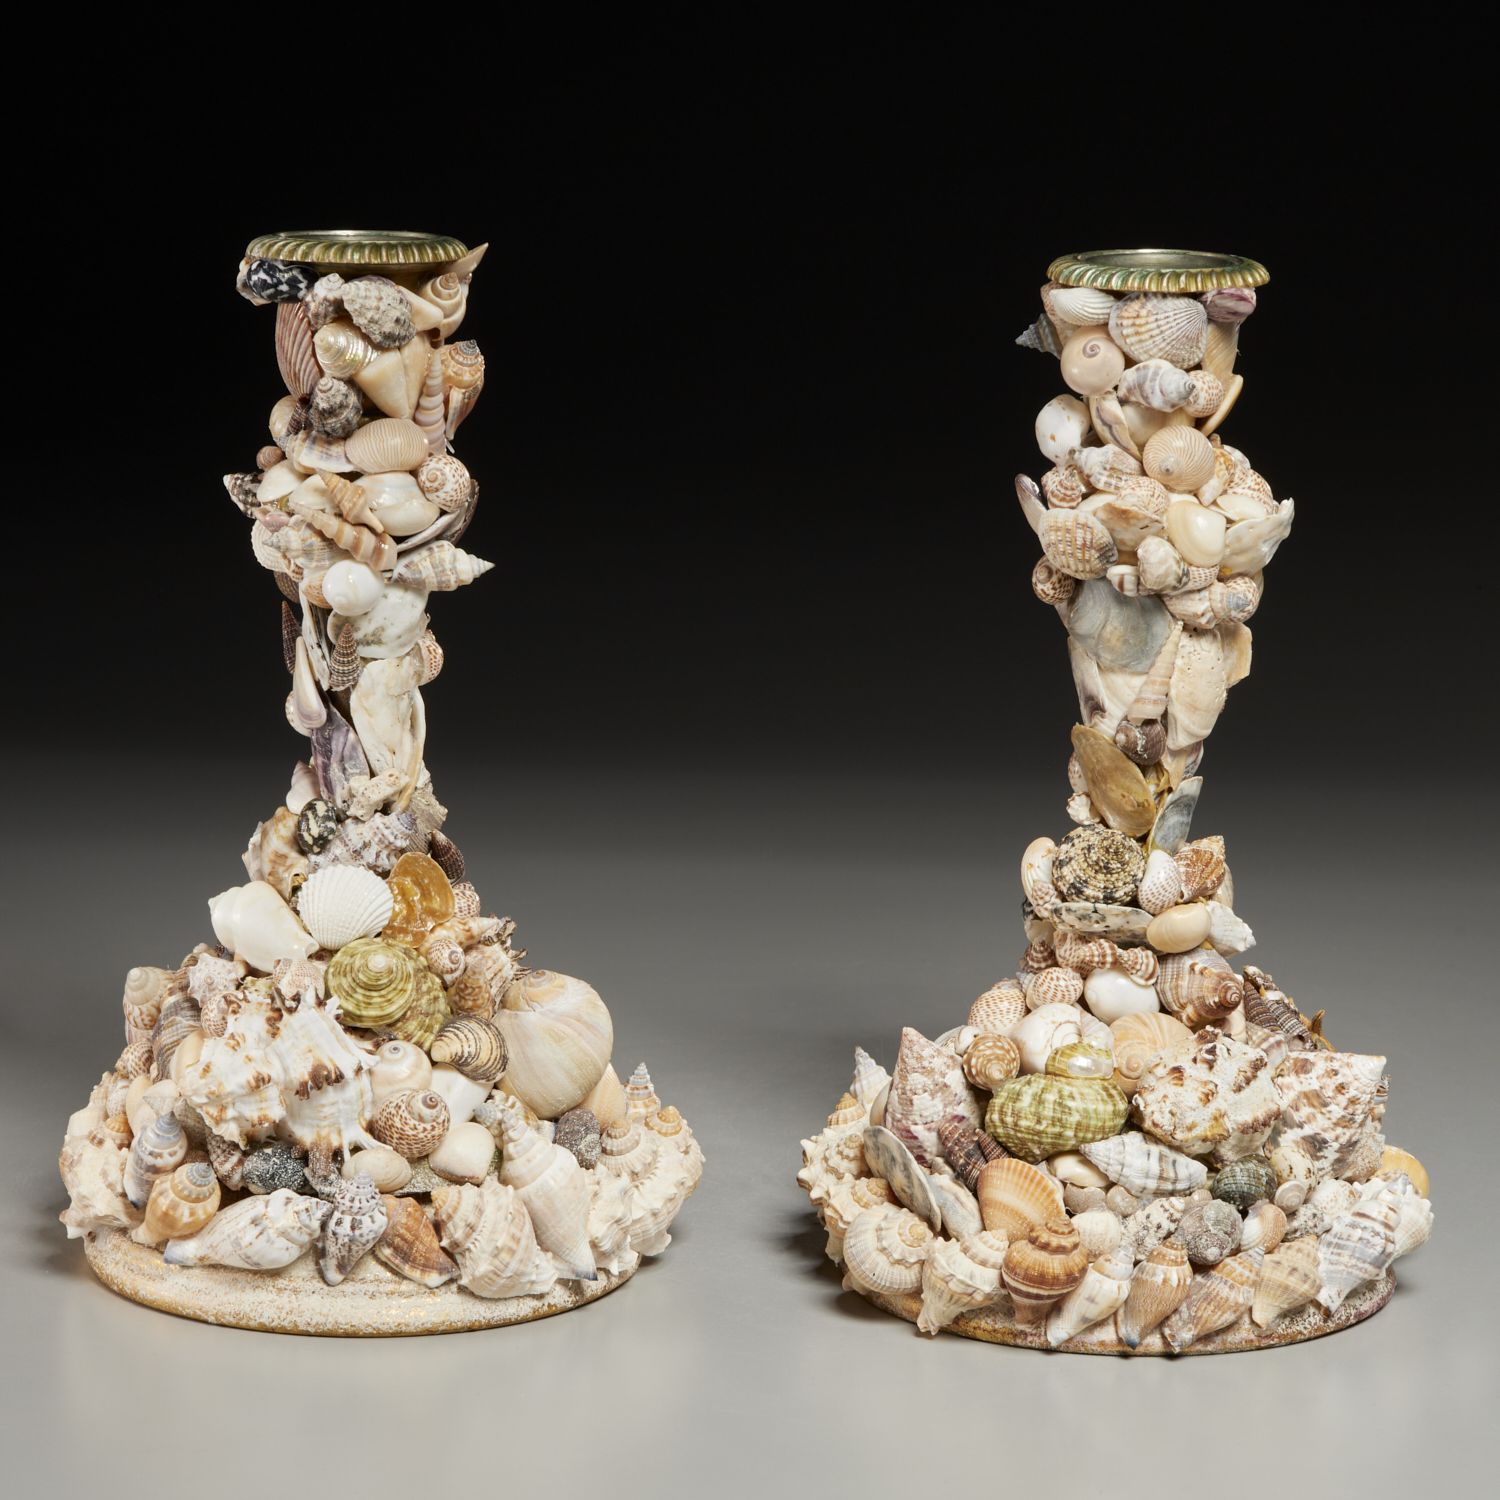 ANTHONY REDMILE (STYLE), PAIR SHELL